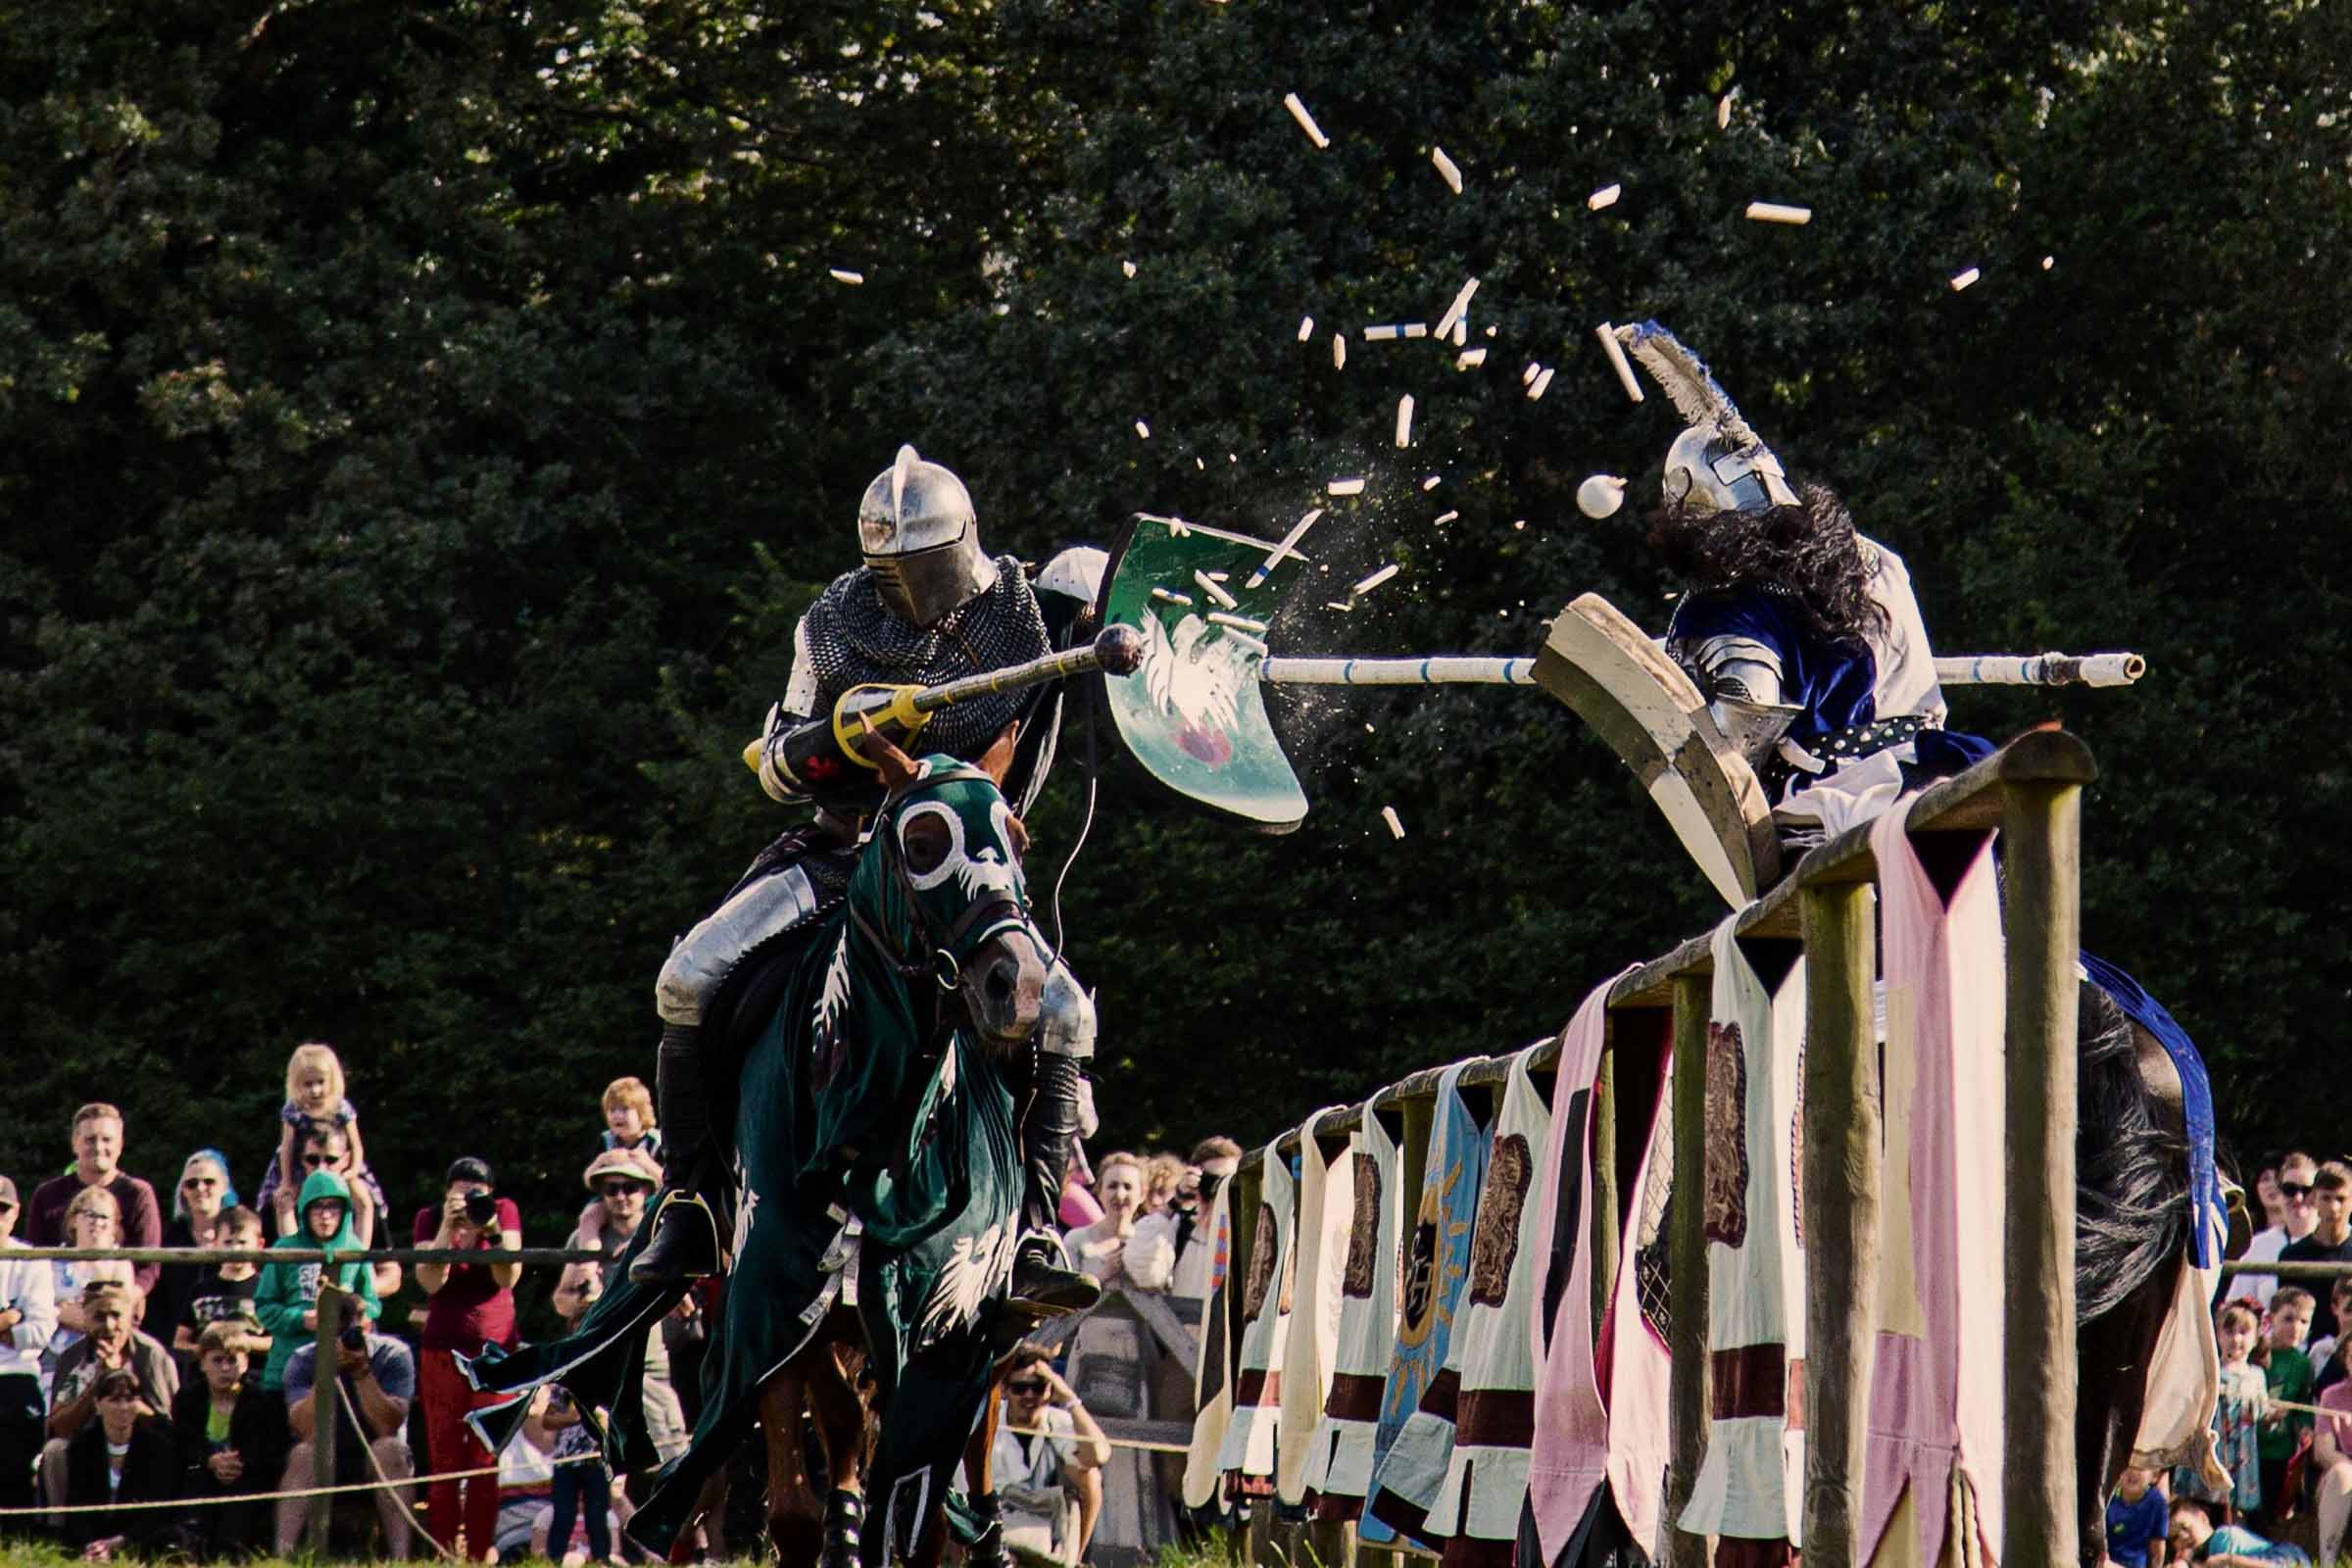 A jouster's lance explodes on contact with the shield of the opposing knight